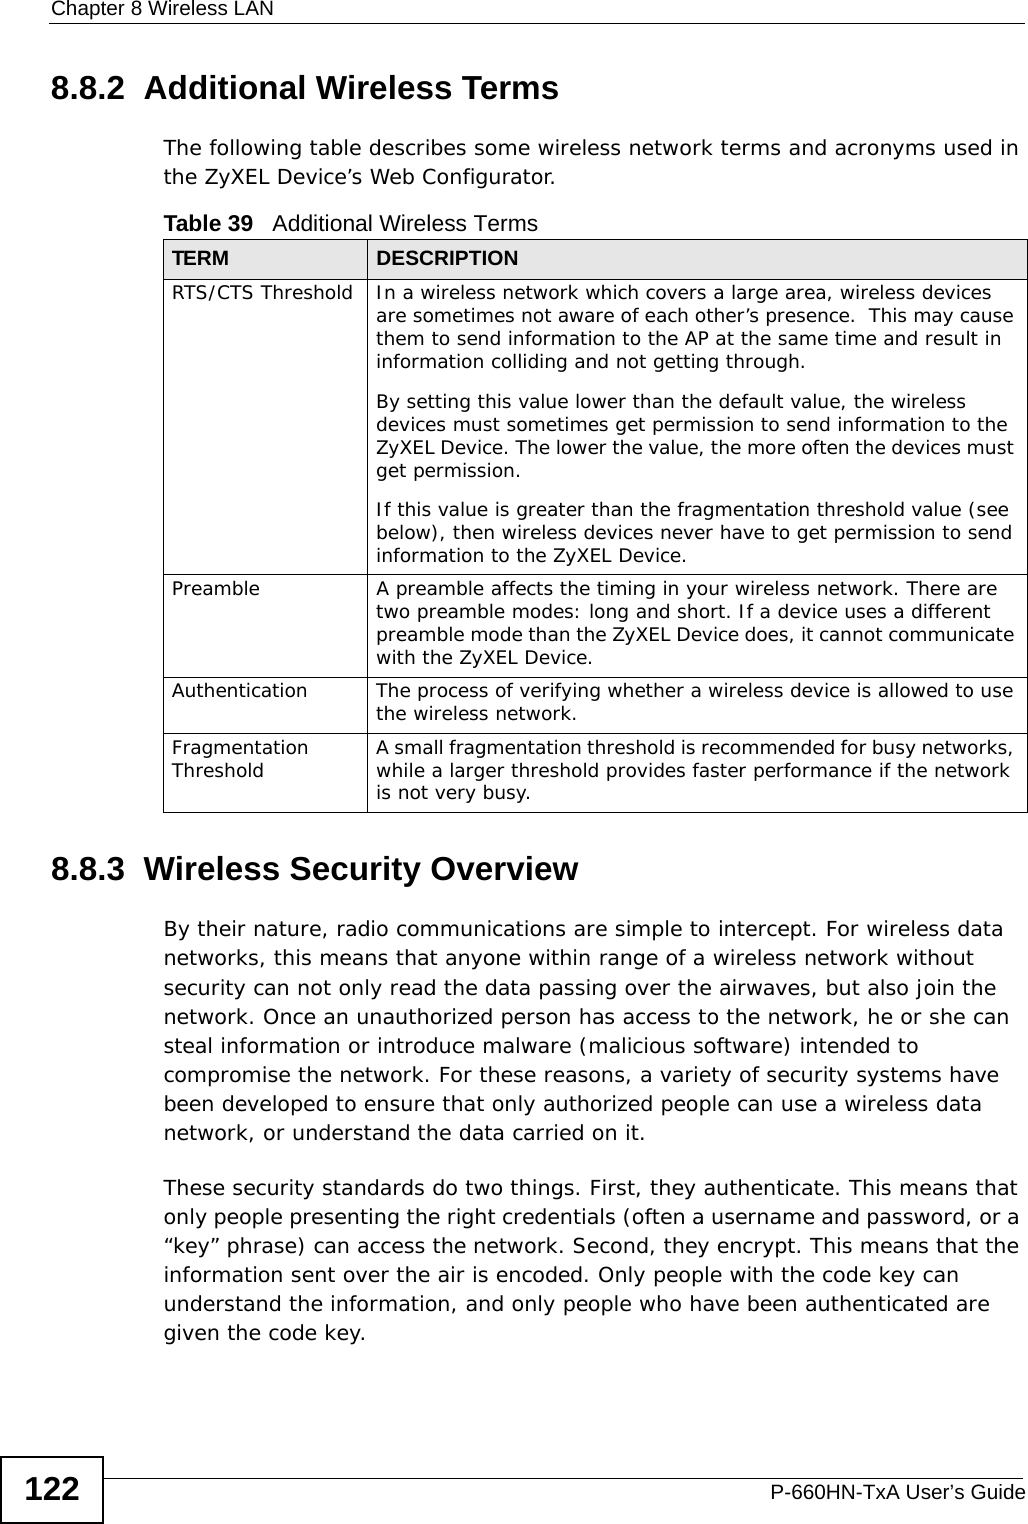 Chapter 8 Wireless LANP-660HN-TxA User’s Guide1228.8.2  Additional Wireless TermsThe following table describes some wireless network terms and acronyms used in the ZyXEL Device’s Web Configurator.8.8.3  Wireless Security OverviewBy their nature, radio communications are simple to intercept. For wireless data networks, this means that anyone within range of a wireless network without security can not only read the data passing over the airwaves, but also join the network. Once an unauthorized person has access to the network, he or she can steal information or introduce malware (malicious software) intended to compromise the network. For these reasons, a variety of security systems have been developed to ensure that only authorized people can use a wireless data network, or understand the data carried on it.These security standards do two things. First, they authenticate. This means that only people presenting the right credentials (often a username and password, or a “key” phrase) can access the network. Second, they encrypt. This means that the information sent over the air is encoded. Only people with the code key can understand the information, and only people who have been authenticated are given the code key.Table 39   Additional Wireless TermsTERM DESCRIPTIONRTS/CTS Threshold In a wireless network which covers a large area, wireless devices are sometimes not aware of each other’s presence.  This may cause them to send information to the AP at the same time and result in information colliding and not getting through.By setting this value lower than the default value, the wireless devices must sometimes get permission to send information to the ZyXEL Device. The lower the value, the more often the devices must get permission.If this value is greater than the fragmentation threshold value (see below), then wireless devices never have to get permission to send information to the ZyXEL Device.Preamble A preamble affects the timing in your wireless network. There are two preamble modes: long and short. If a device uses a different preamble mode than the ZyXEL Device does, it cannot communicate with the ZyXEL Device.Authentication The process of verifying whether a wireless device is allowed to use the wireless network.Fragmentation Threshold A small fragmentation threshold is recommended for busy networks, while a larger threshold provides faster performance if the network is not very busy.